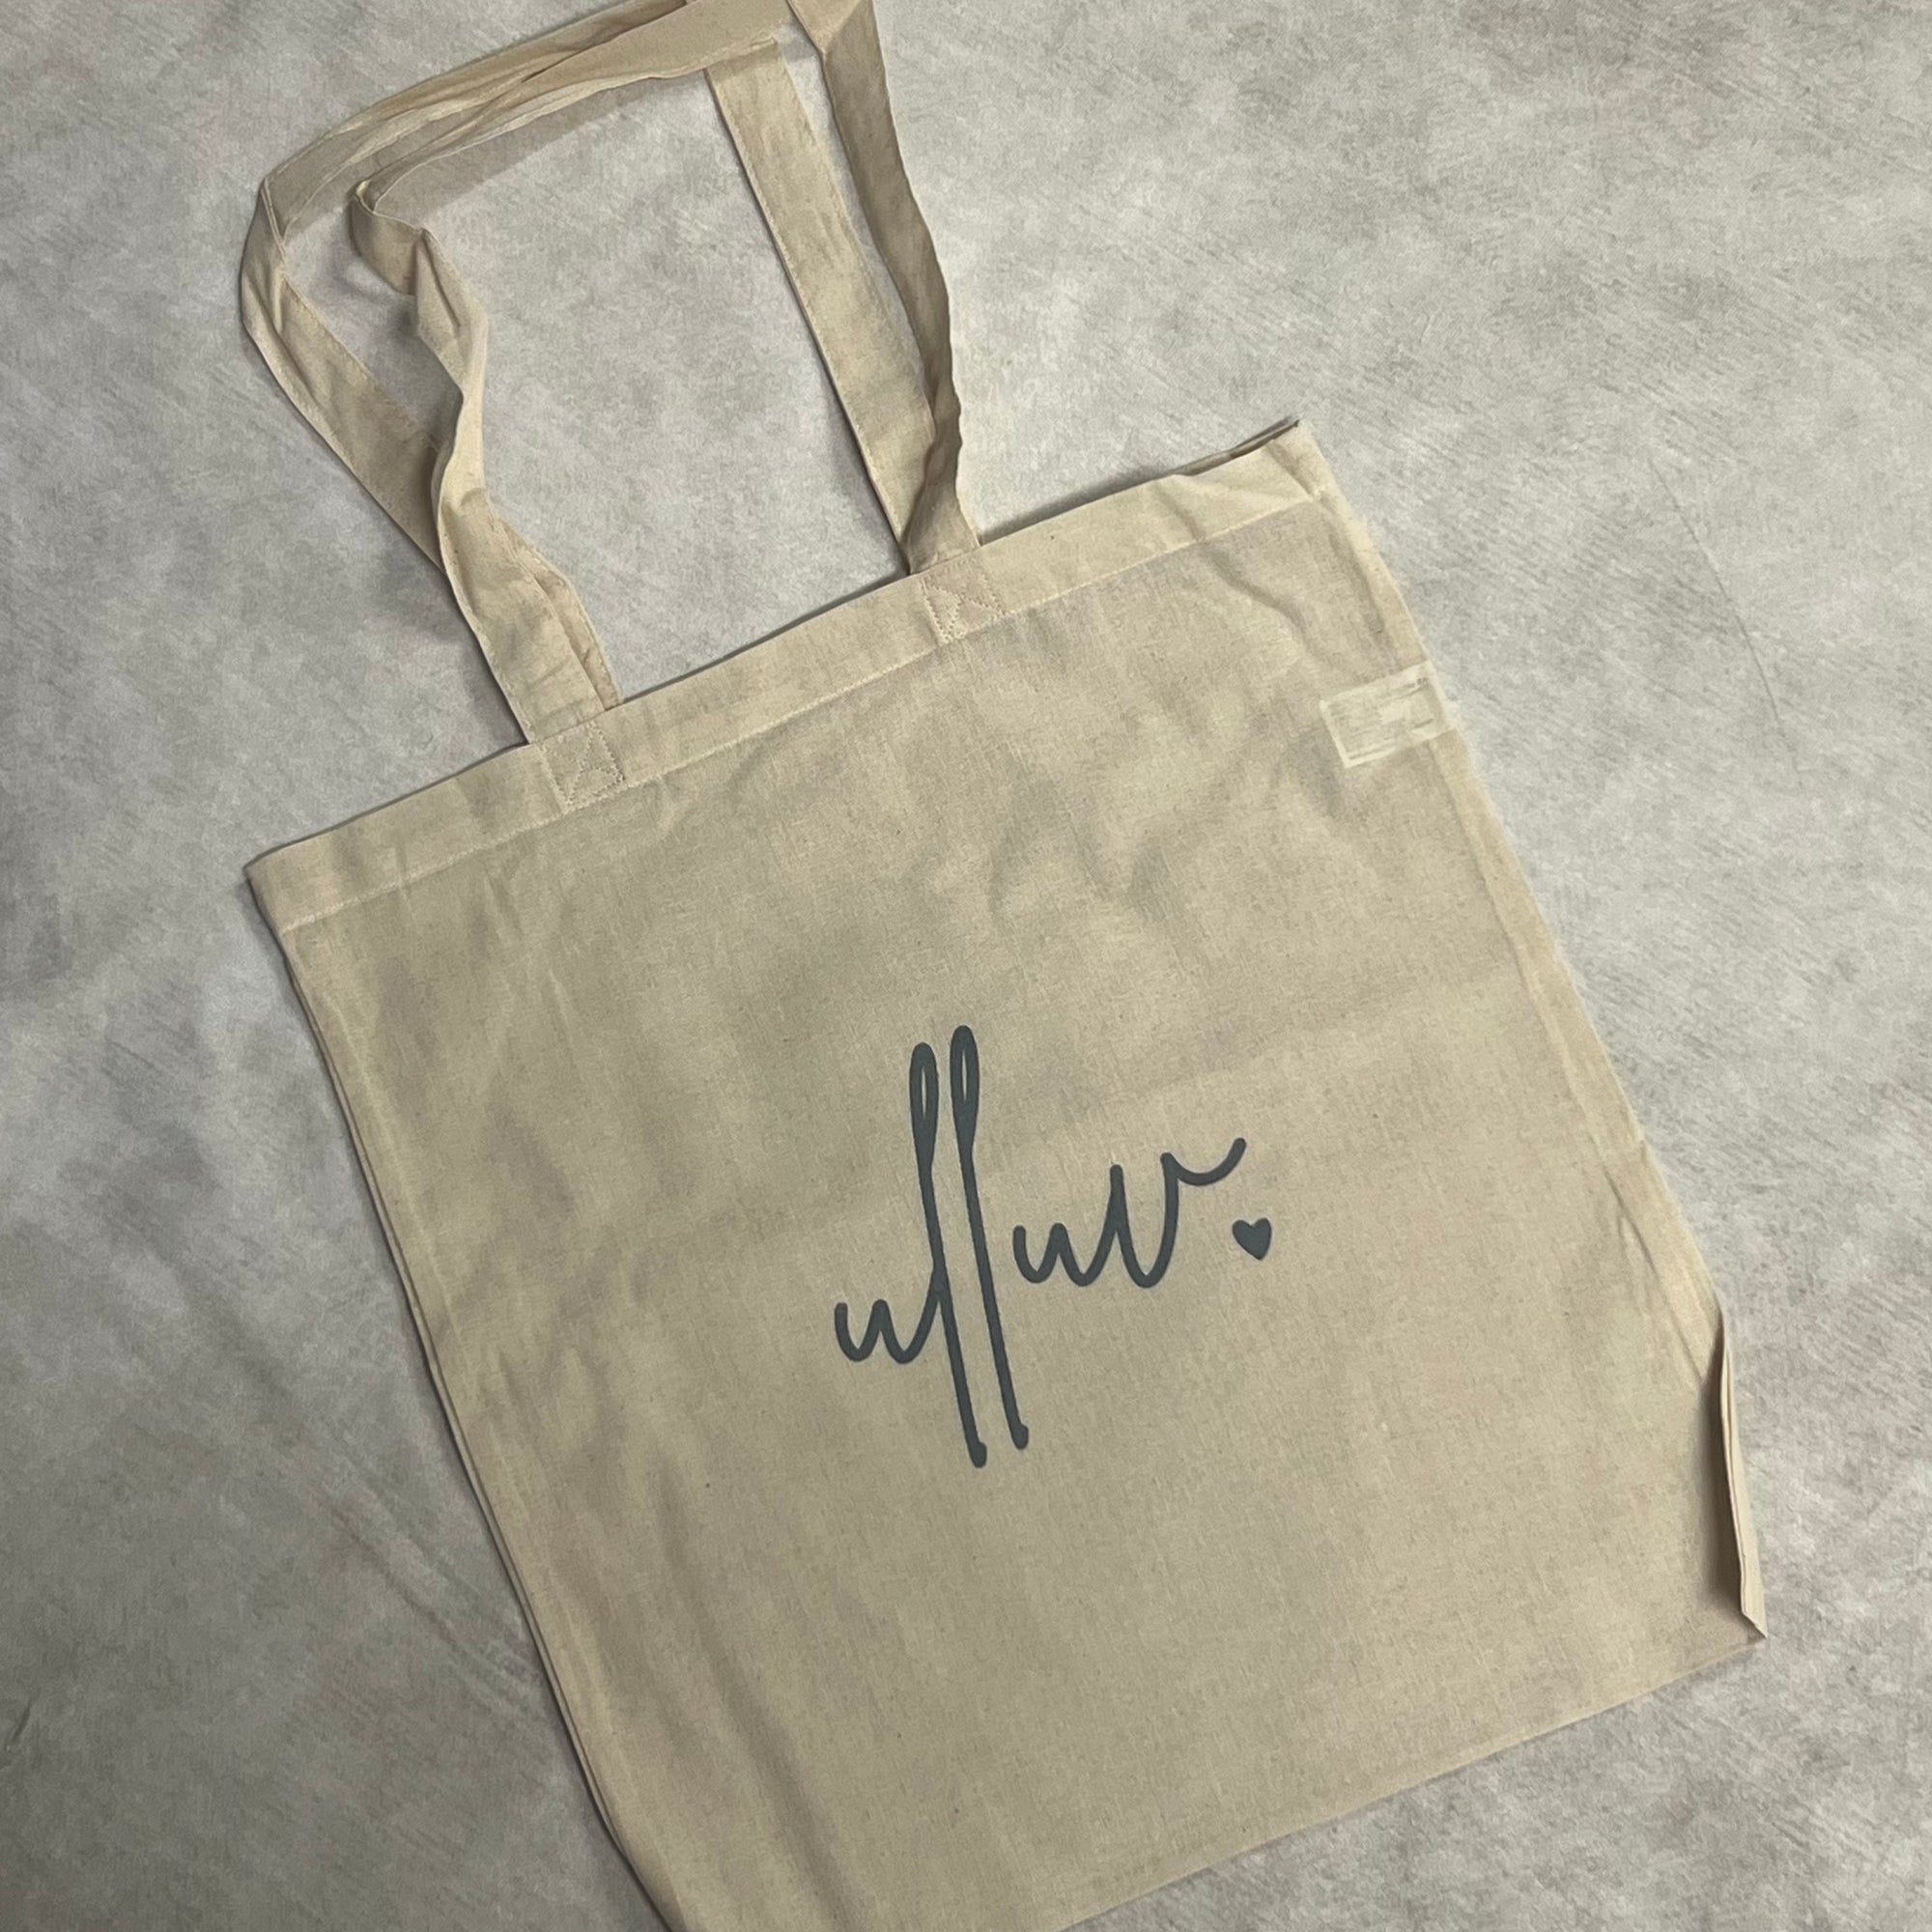 CLEARANCE - Ulluv Cotton Tote